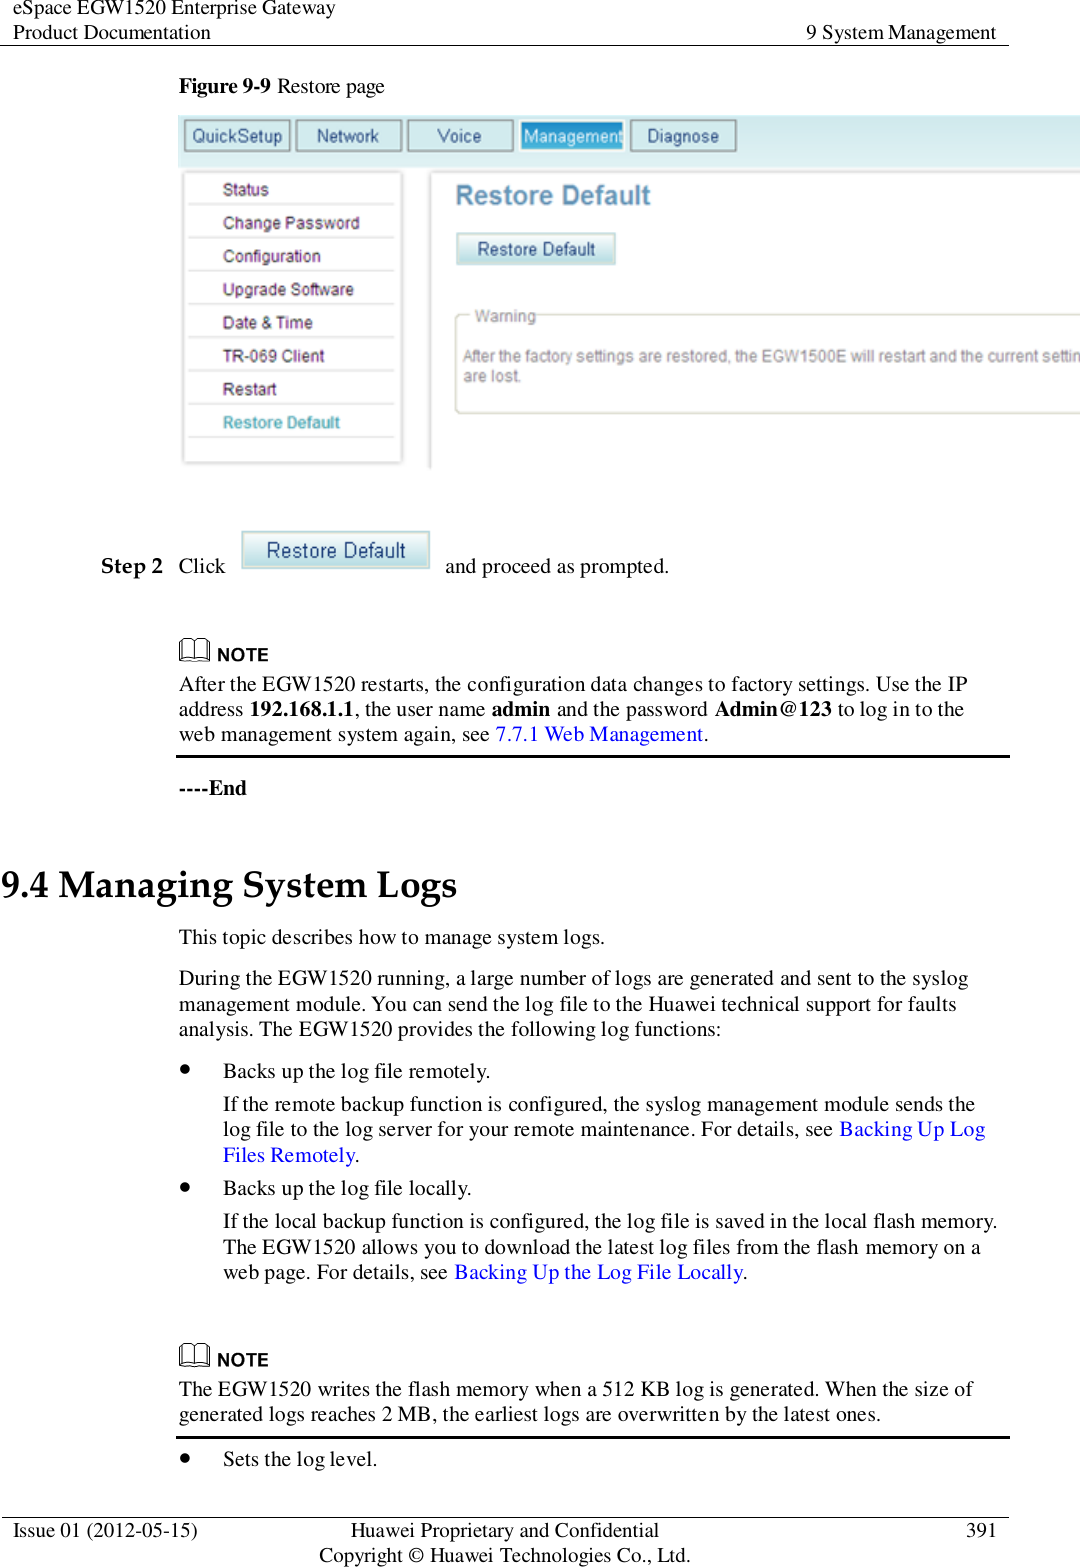 eSpace EGW1520 Enterprise Gateway Product Documentation 9 System Management  Issue 01 (2012-05-15) Huawei Proprietary and Confidential                                     Copyright © Huawei Technologies Co., Ltd. 391  Figure 9-9 Restore page   Step 2 Click    and proceed as prompted.   After the EGW1520 restarts, the configuration data changes to factory settings. Use the IP address 192.168.1.1, the user name admin and the password Admin@123 to log in to the web management system again, see 7.7.1 Web Management. ----End 9.4 Managing System Logs This topic describes how to manage system logs. During the EGW1520 running, a large number of logs are generated and sent to the syslog management module. You can send the log file to the Huawei technical support for faults analysis. The EGW1520 provides the following log functions:  Backs up the log file remotely. If the remote backup function is configured, the syslog management module sends the log file to the log server for your remote maintenance. For details, see Backing Up Log Files Remotely.  Backs up the log file locally. If the local backup function is configured, the log file is saved in the local flash memory. The EGW1520 allows you to download the latest log files from the flash memory on a web page. For details, see Backing Up the Log File Locally.   The EGW1520 writes the flash memory when a 512 KB log is generated. When the size of generated logs reaches 2 MB, the earliest logs are overwritten by the latest ones.  Sets the log level. 